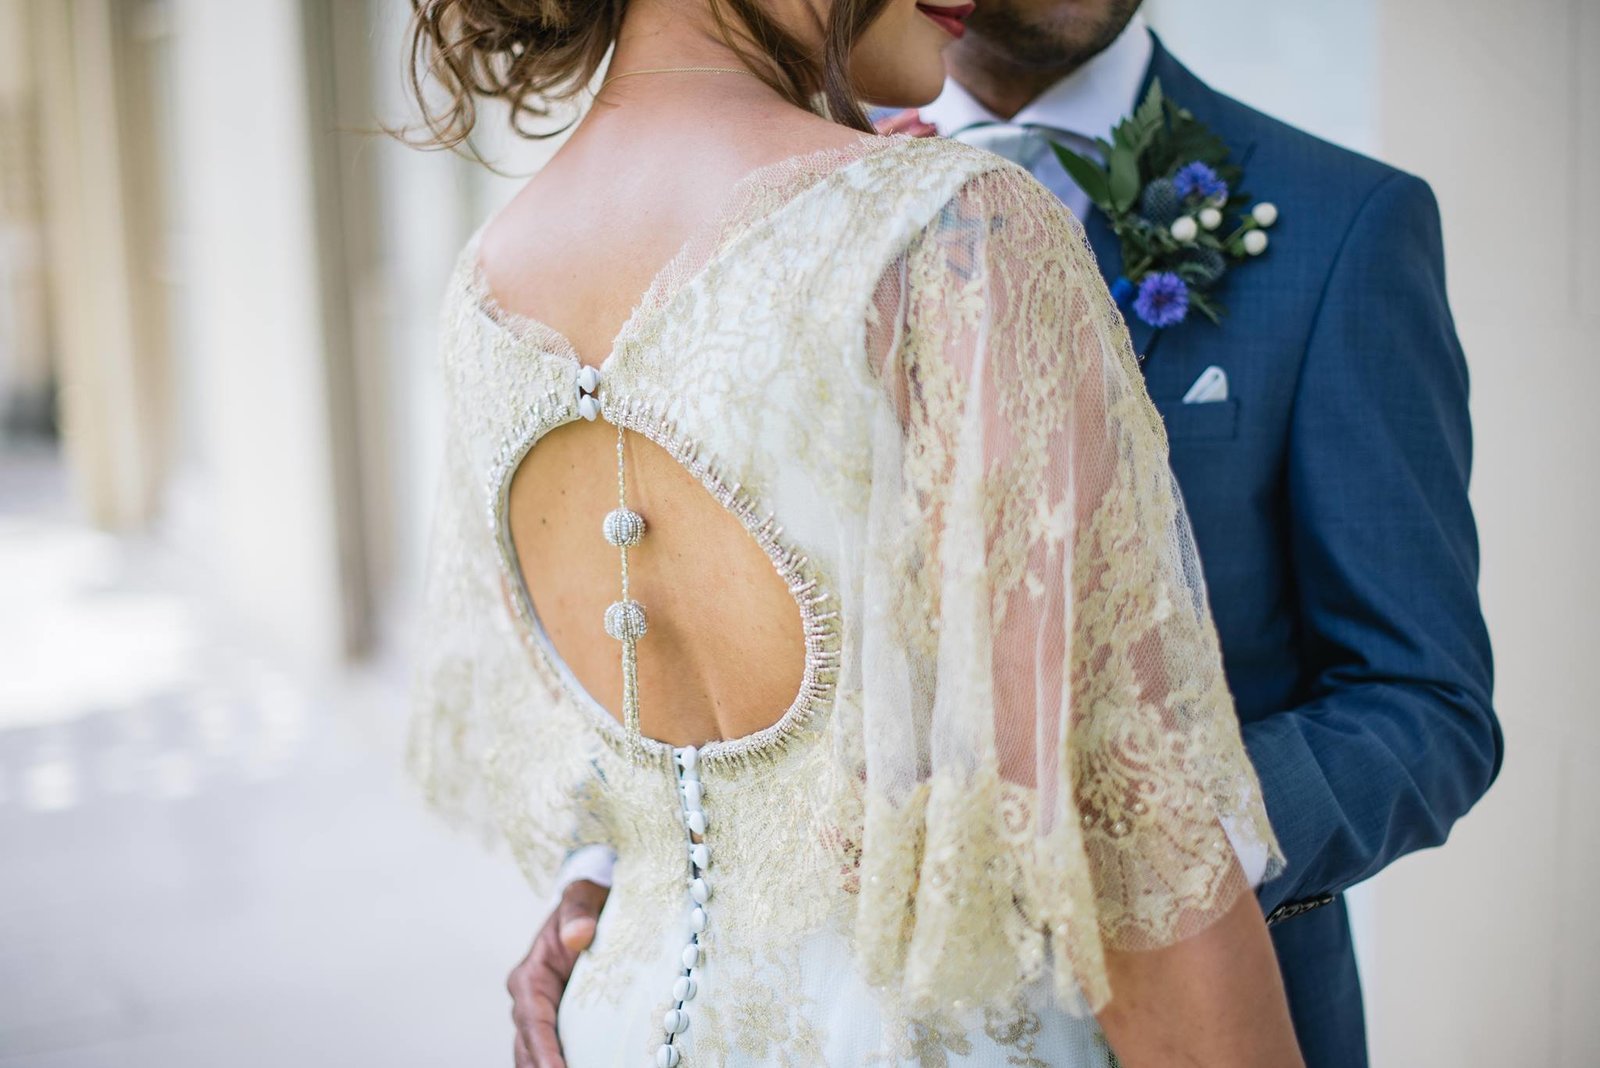 Anglo Indian fusion wedding blue and gold dress by Joanne Fleming Design, photo by Jacqui McSweeney (1)